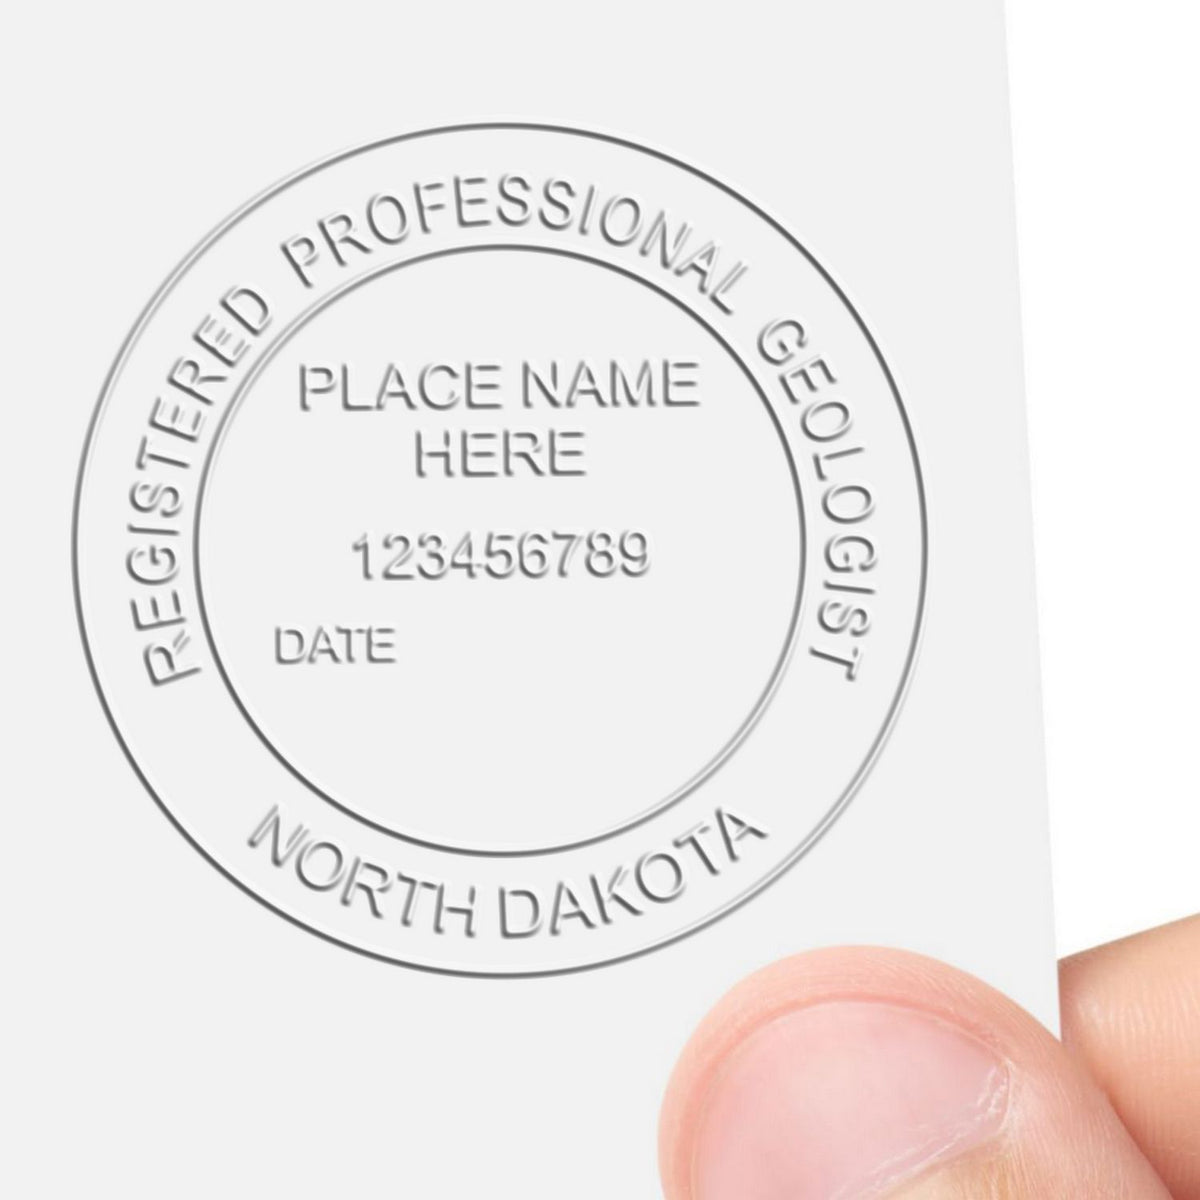 An in use photo of the Long Reach North Dakota Geology Seal showing a sample imprint on a cardstock